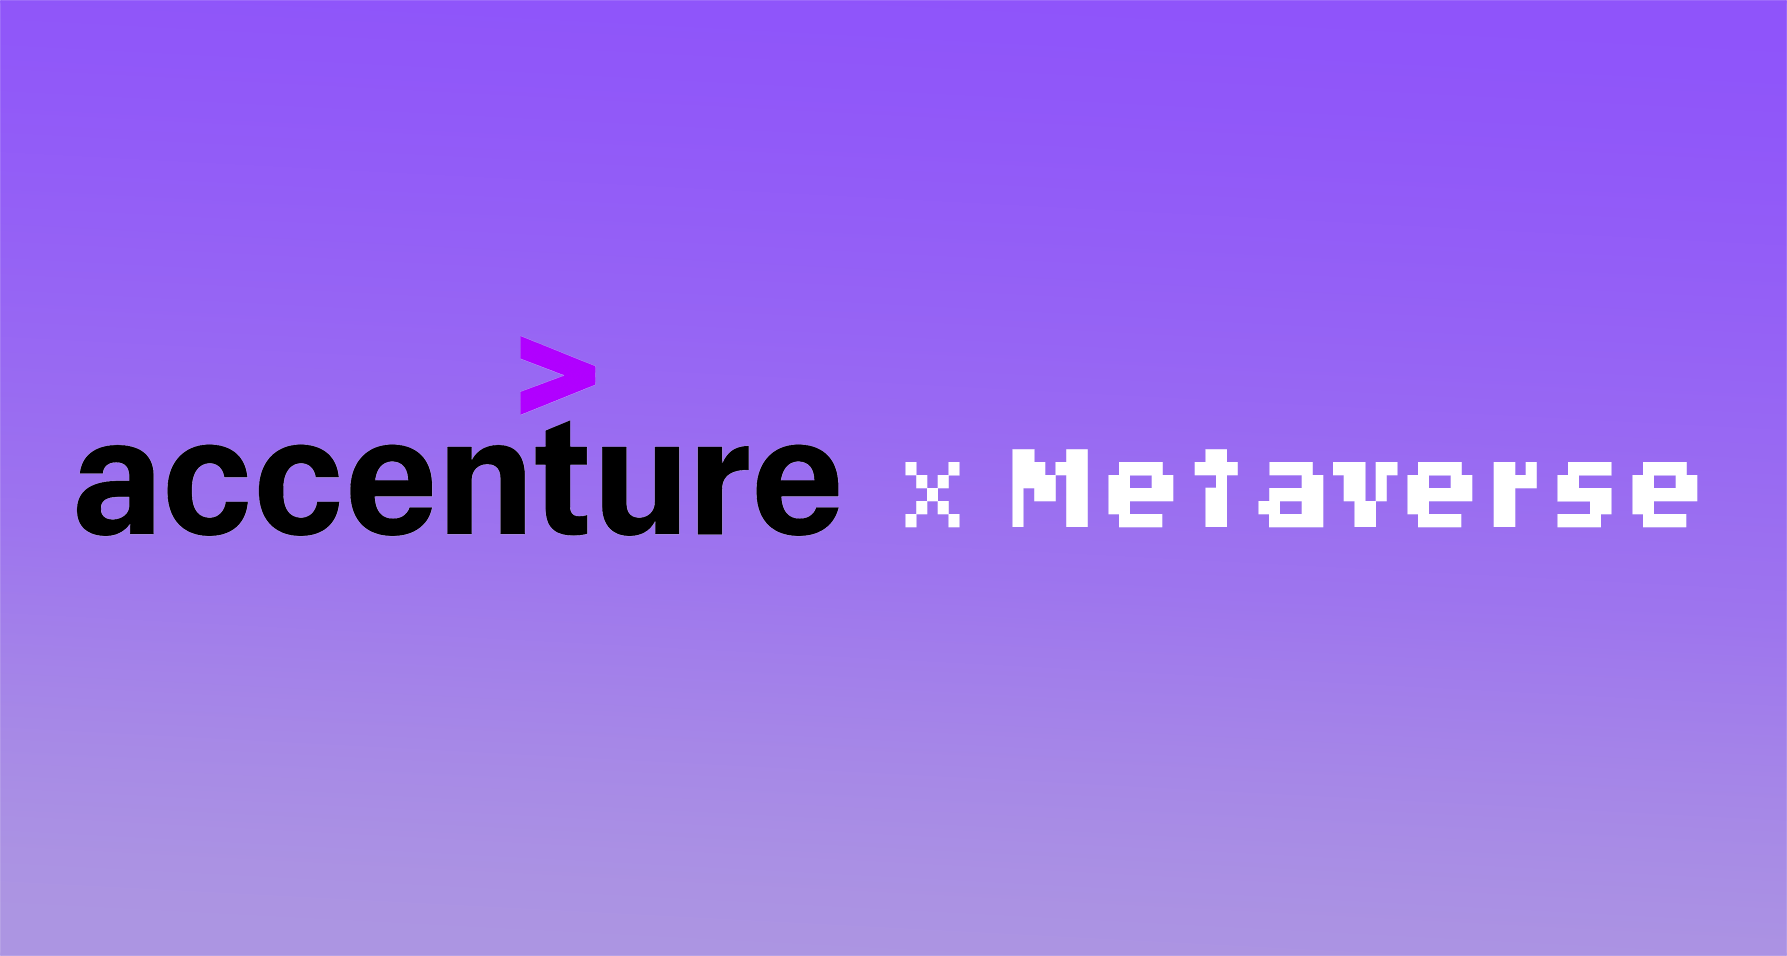 What is the Accenture’s Metaverse?